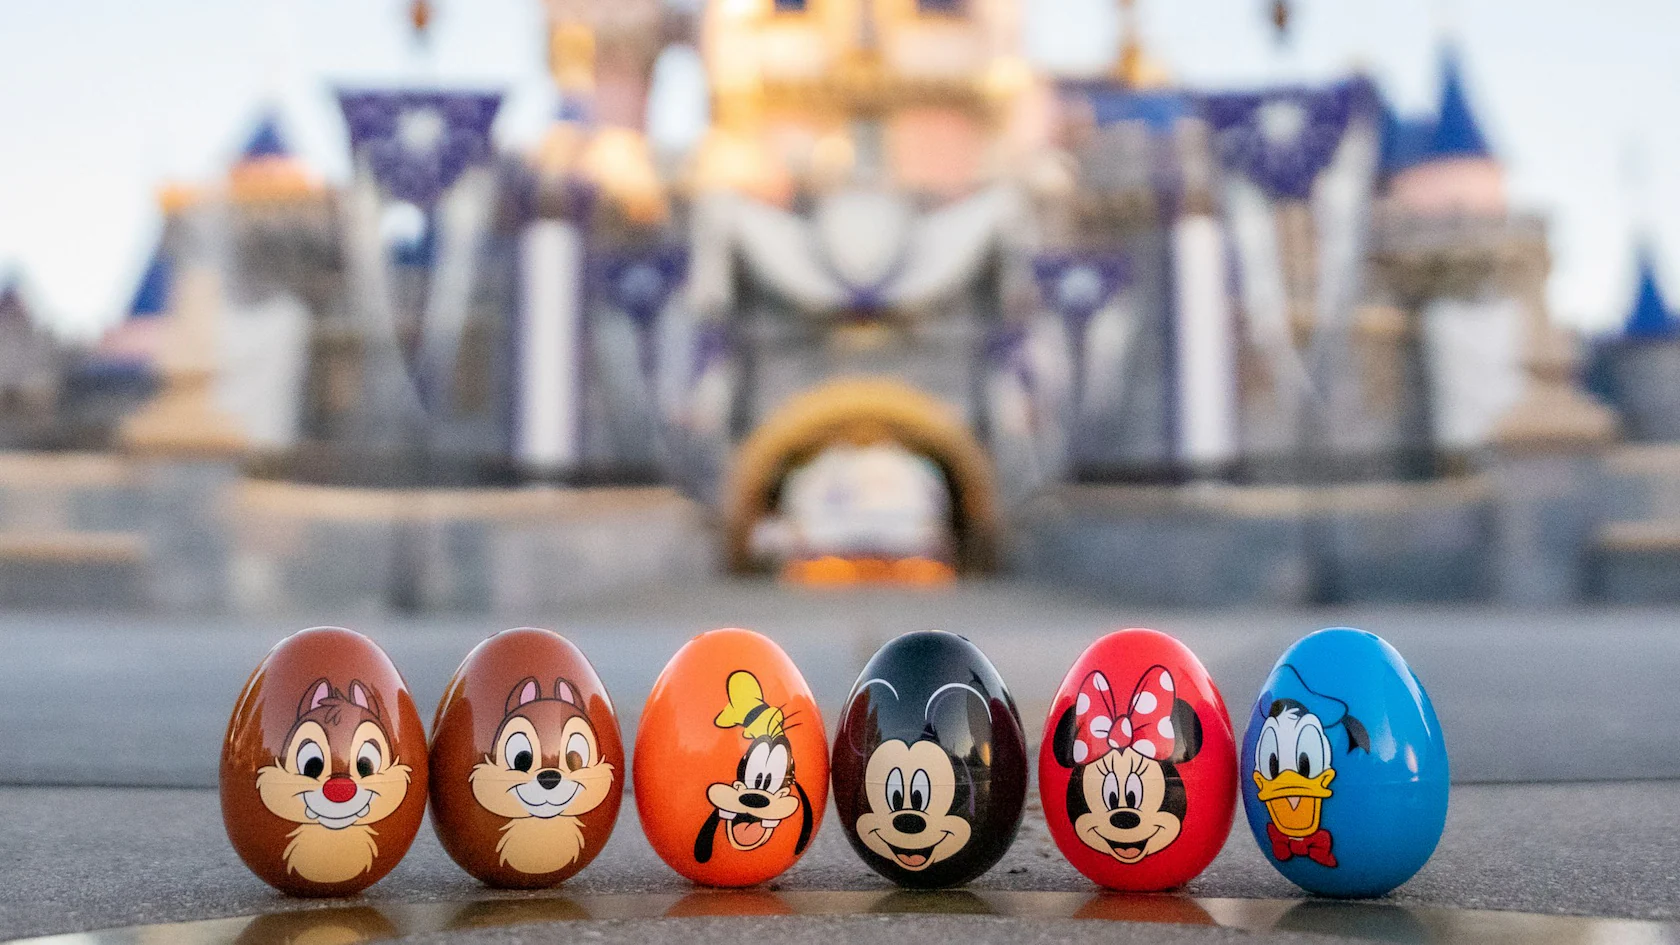 Disneyland is Hosting An Easter Egg Hunt. Here's How You Can Join.